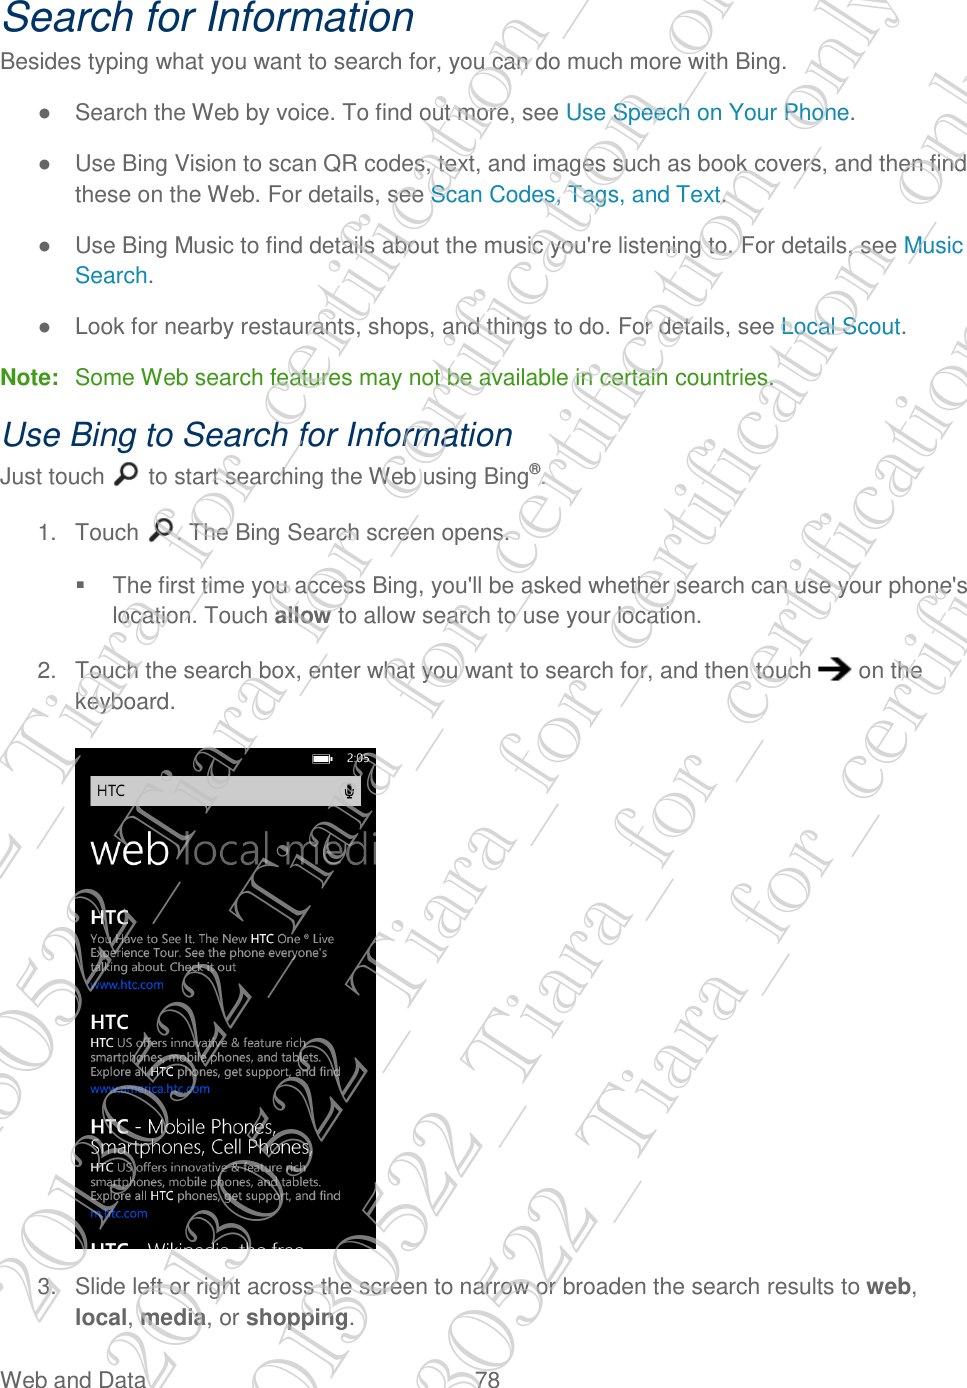  Web and Data  78   Search for Information Besides typing what you want to search for, you can do much more with Bing. ●  Search the Web by voice. To find out more, see Use Speech on Your Phone. ●  Use Bing Vision to scan QR codes, text, and images such as book covers, and then find these on the Web. For details, see Scan Codes, Tags, and Text. ●  Use Bing Music to find details about the music you&apos;re listening to. For details, see Music Search. ●  Look for nearby restaurants, shops, and things to do. For details, see Local Scout. Note:  Some Web search features may not be available in certain countries. Use Bing to Search for Information Just touch   to start searching the Web using Bing®. 1.  Touch  . The Bing Search screen opens.   The first time you access Bing, you&apos;ll be asked whether search can use your phone&apos;s location. Touch allow to allow search to use your location. 2.  Touch the search box, enter what you want to search for, and then touch   on the keyboard.   3.  Slide left or right across the screen to narrow or broaden the search results to web, local, media, or shopping. 20130522_Tiara_for_certification_only 20130522_Tiara_for_certification_only 20130522_Tiara_for_certification_only 20130522_Tiara_for_certification_only 20130522_Tiara_for_certification_only 20130522_Tiara_for_certification_only